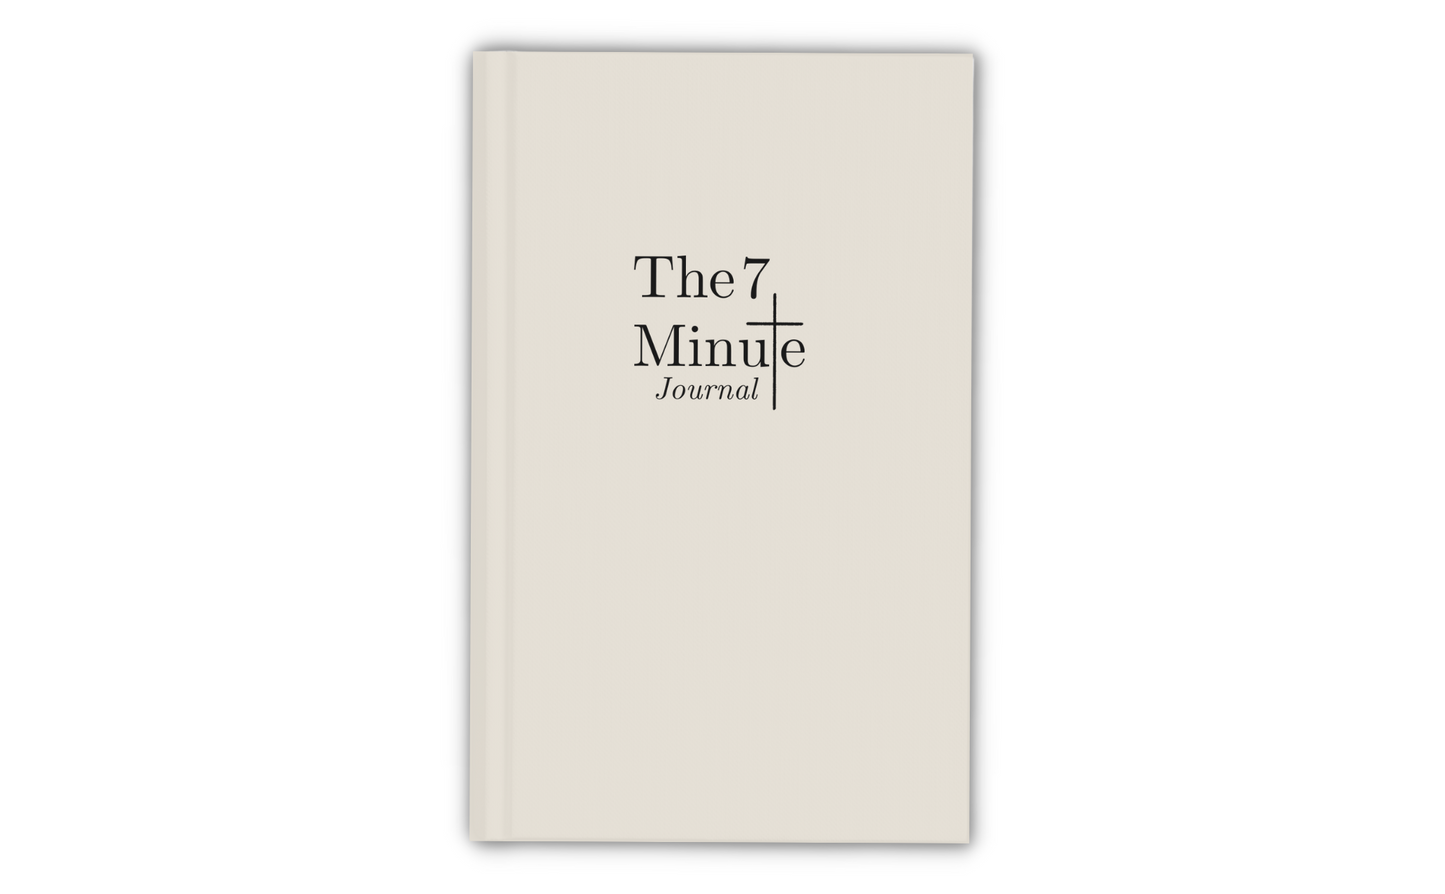 The 7 Minute Journal for Christians (Paperback) IF SOLD OUT — CLICK LINK BELOW TO BUY IT ON AMAZON↓